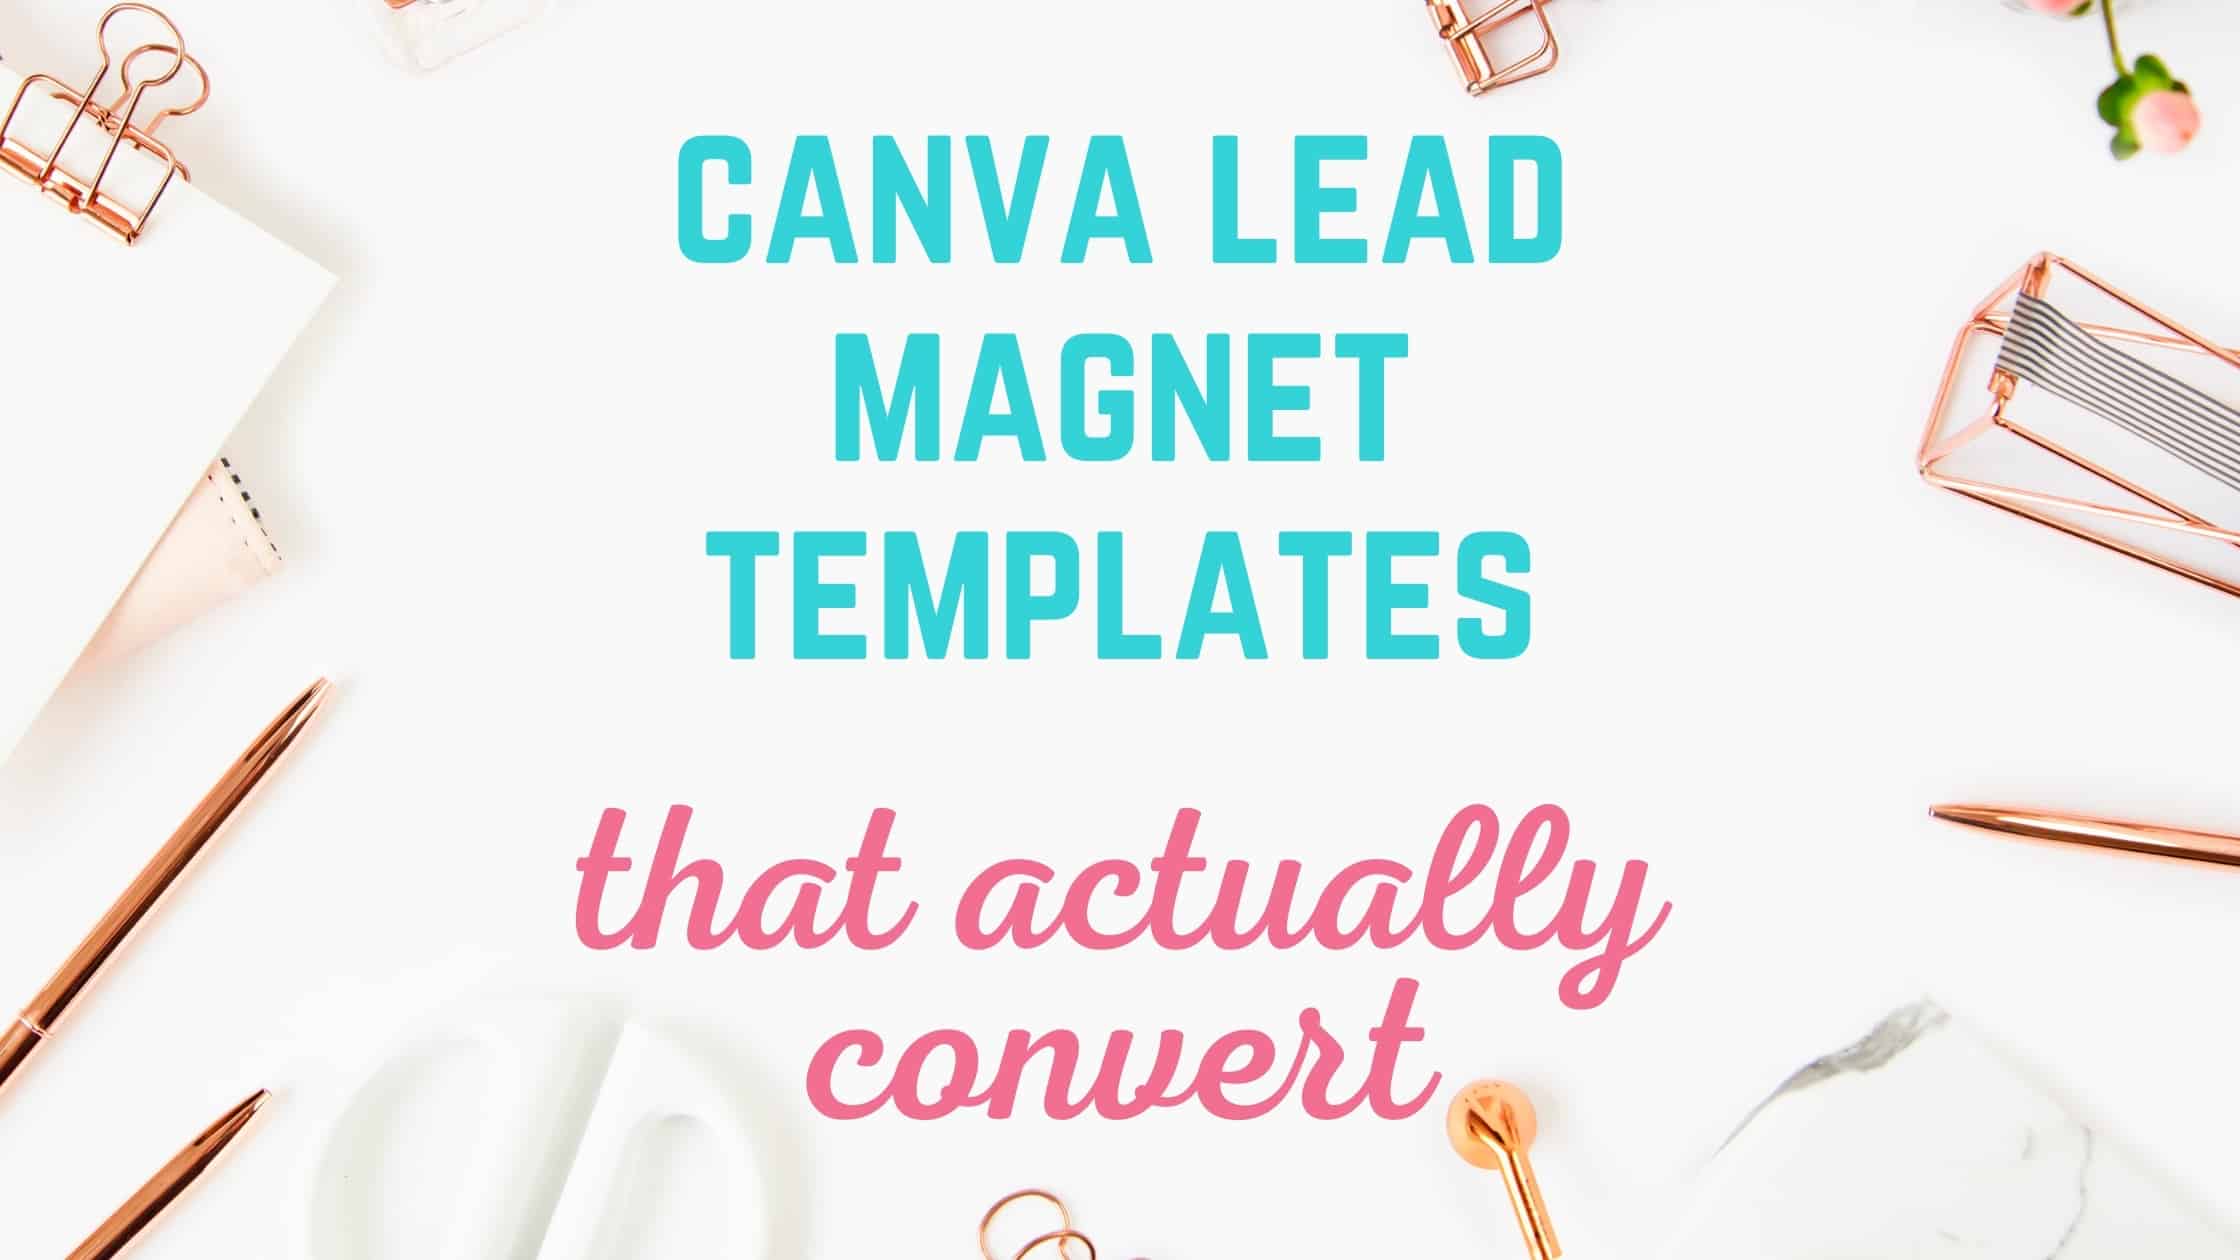 Canva Lead Magnet Templates that Convert Readers to Subscribers